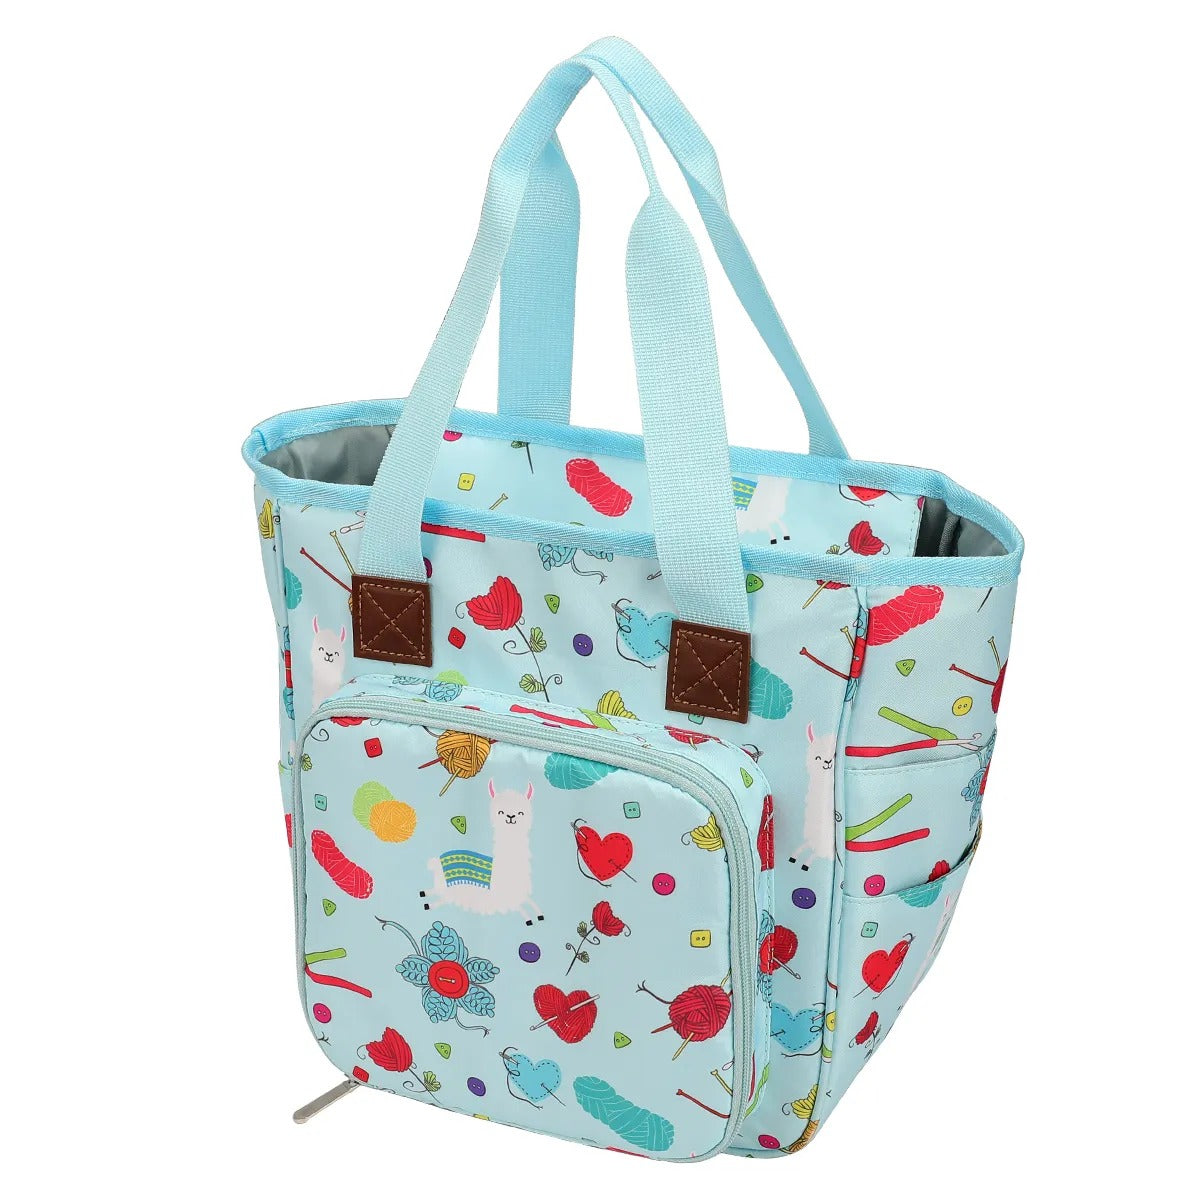 Yarn Organizer Tote with external pocket and blue handles, perfect as a Craft Organizer for crocheting essentials.